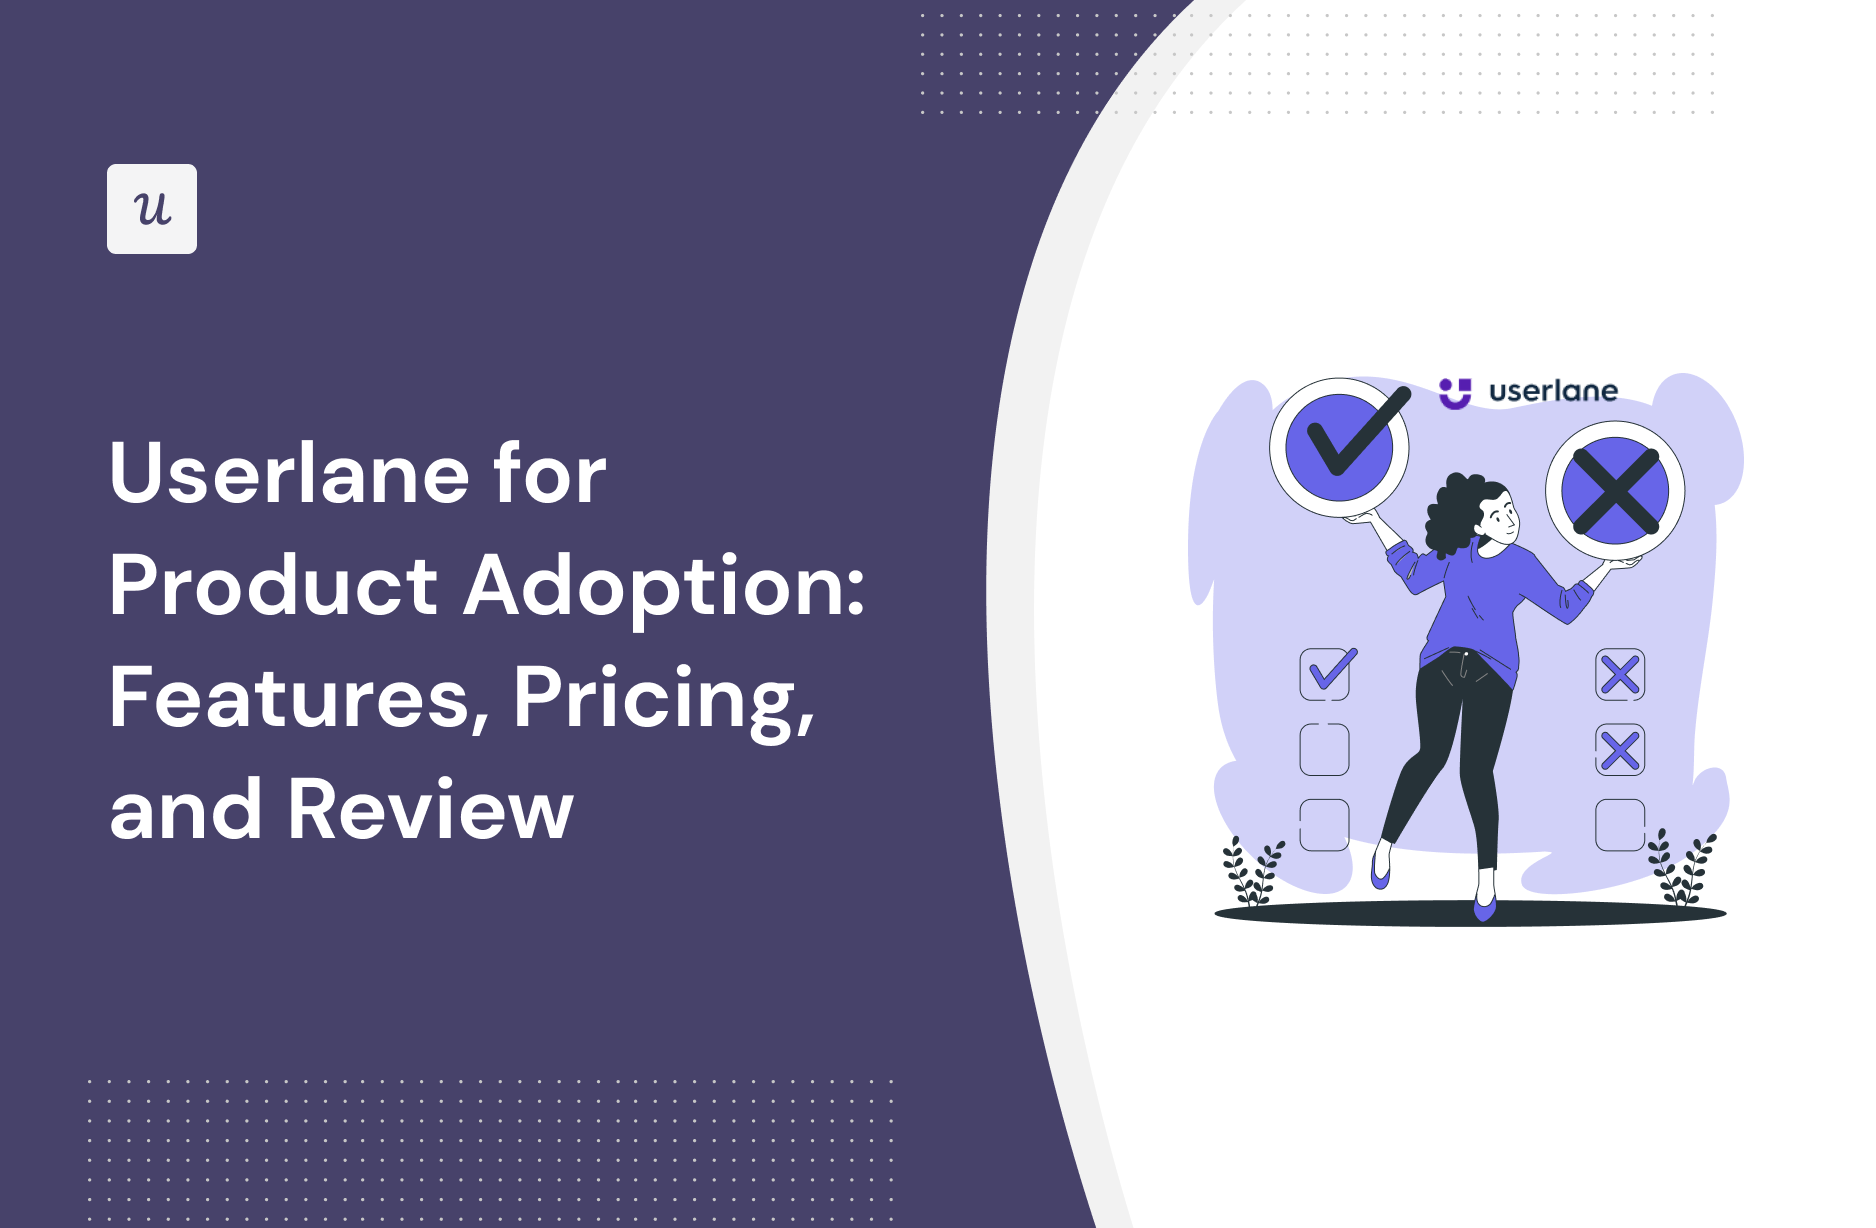 Userlane for Product Adoption: Features, Pricing, and Review